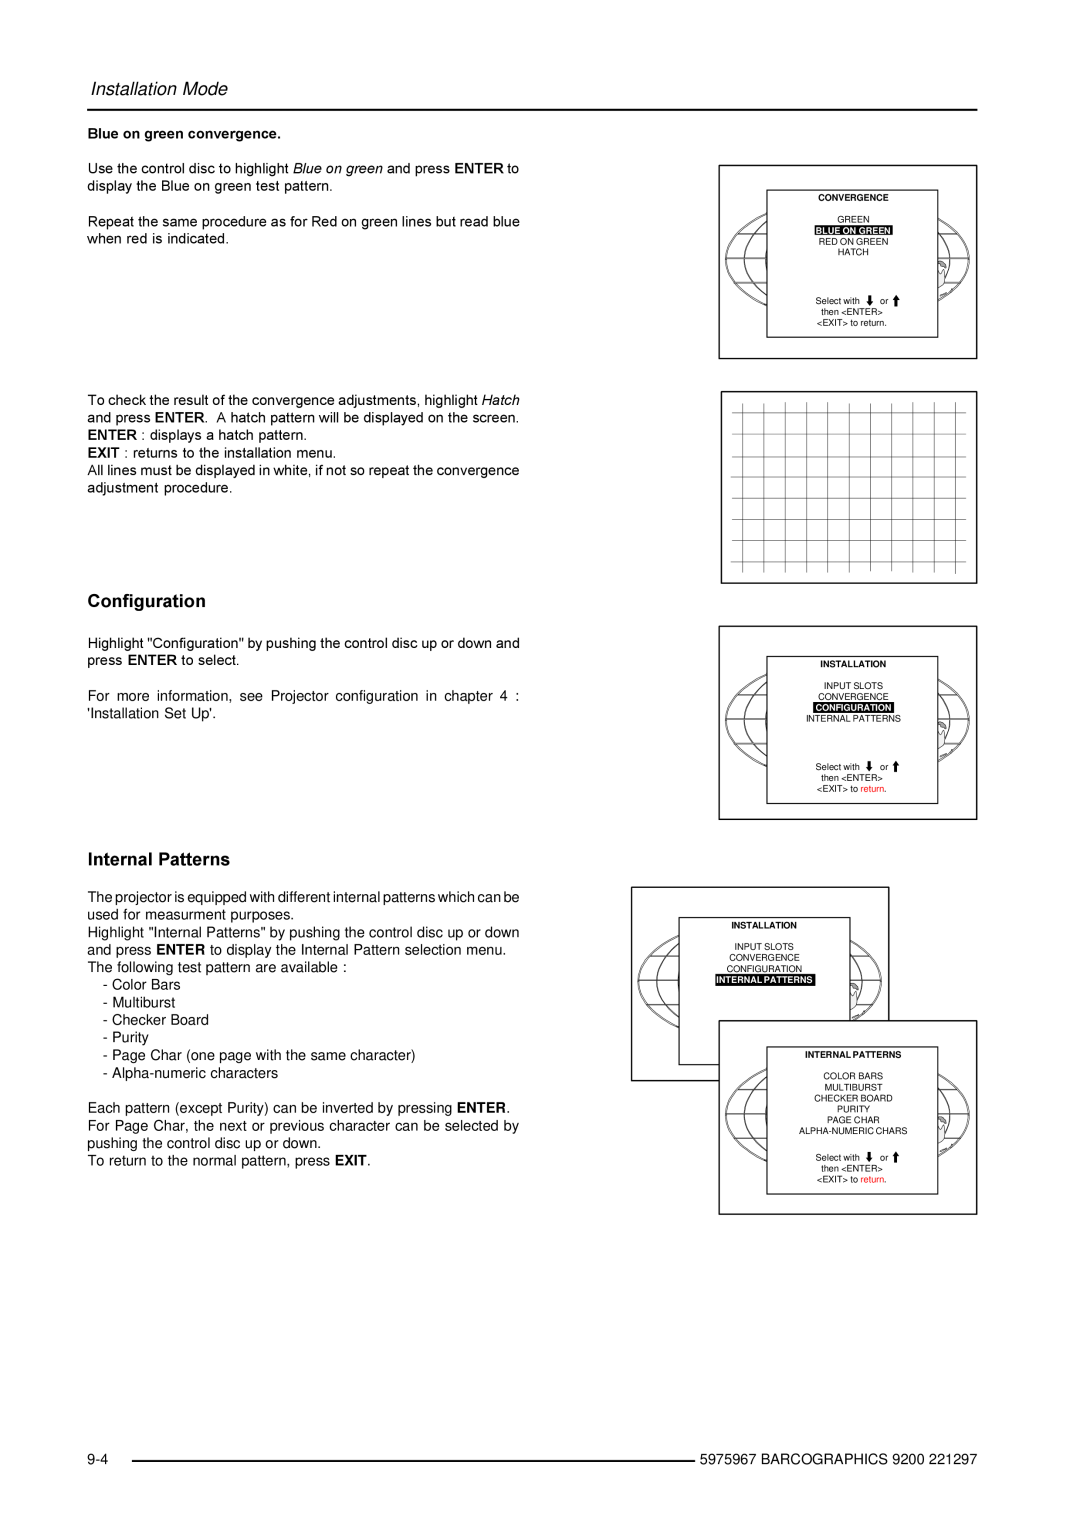 Barco 9200 owner manual Configuration, Internal Patterns, Installation Mode 